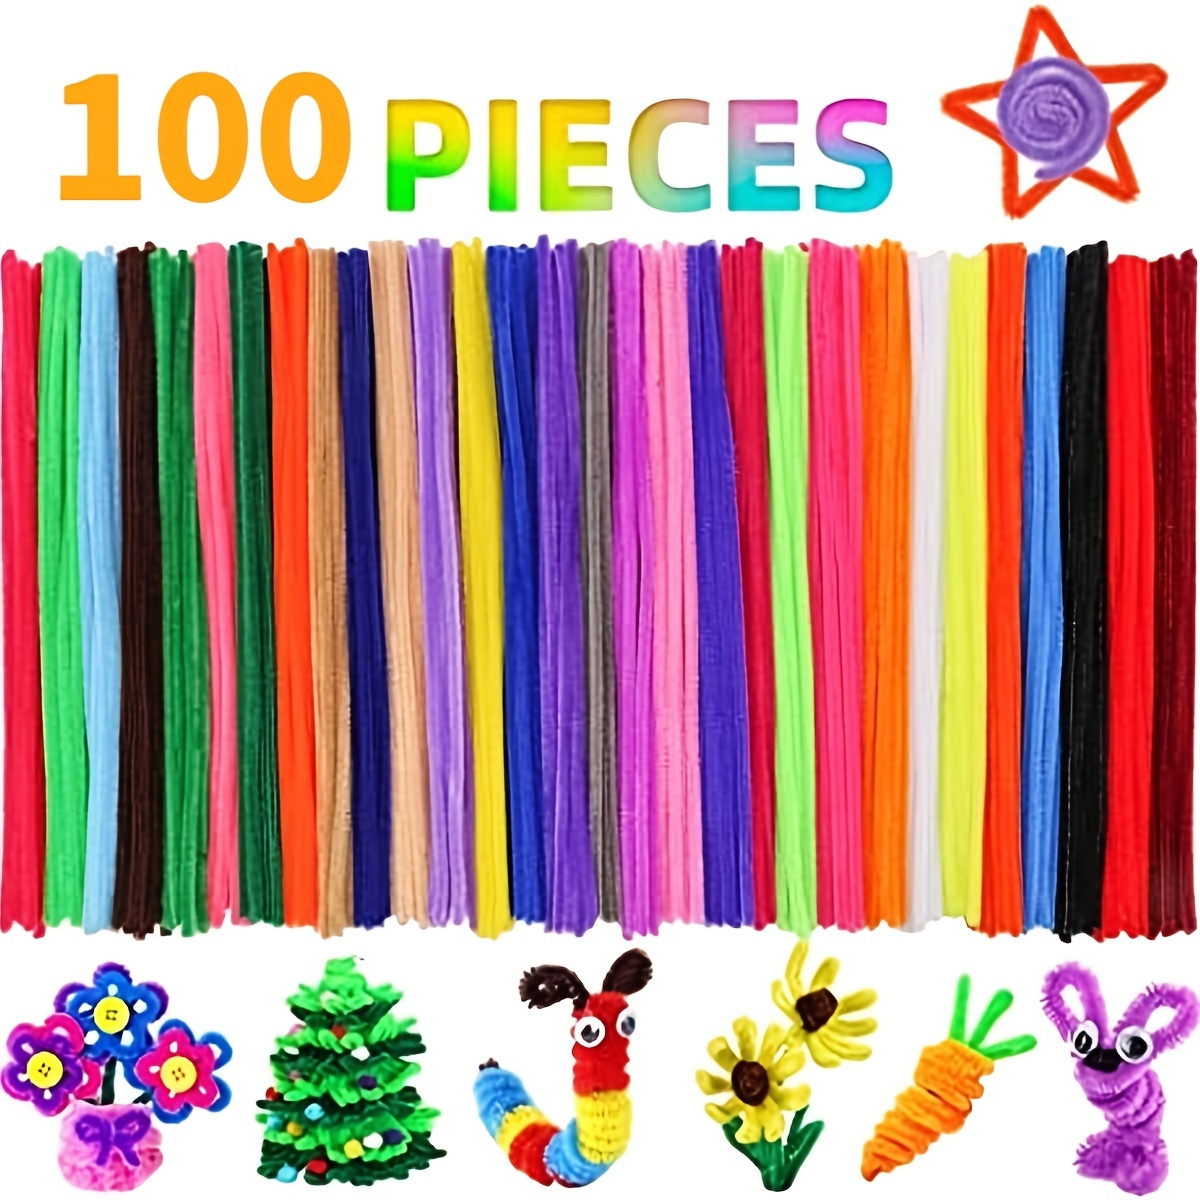 200Pcs Pipe Cleaners 30cm/12 inch Chenille Stems for DIY Art